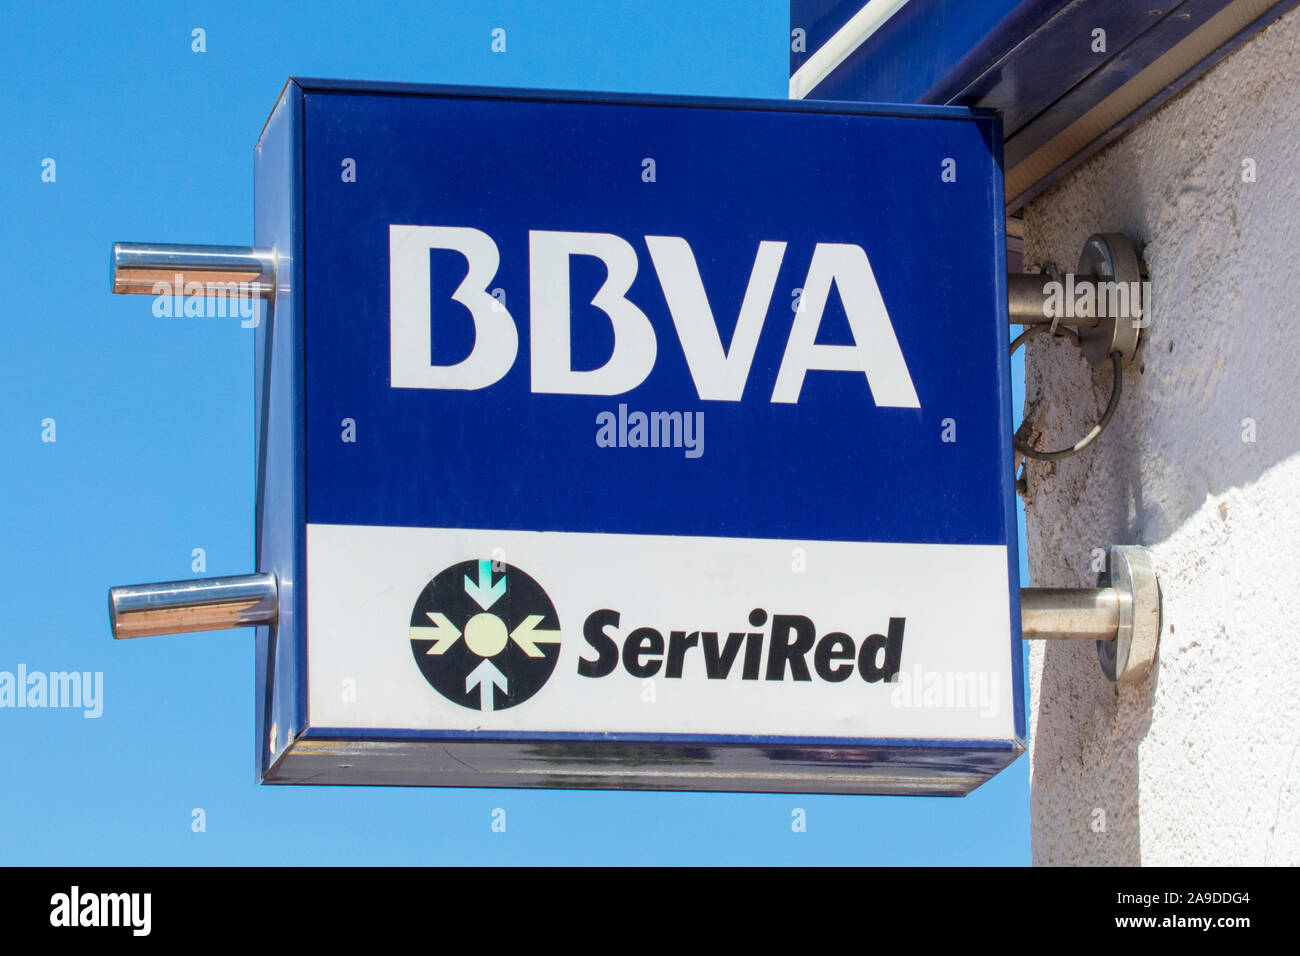 Javea, Spain - April 9th 2019: The BBVA logo above the entrance to a BBVA bank in the coastal town of Javea in Spain. BBVA is also known as Banco Bilb Stock Photo